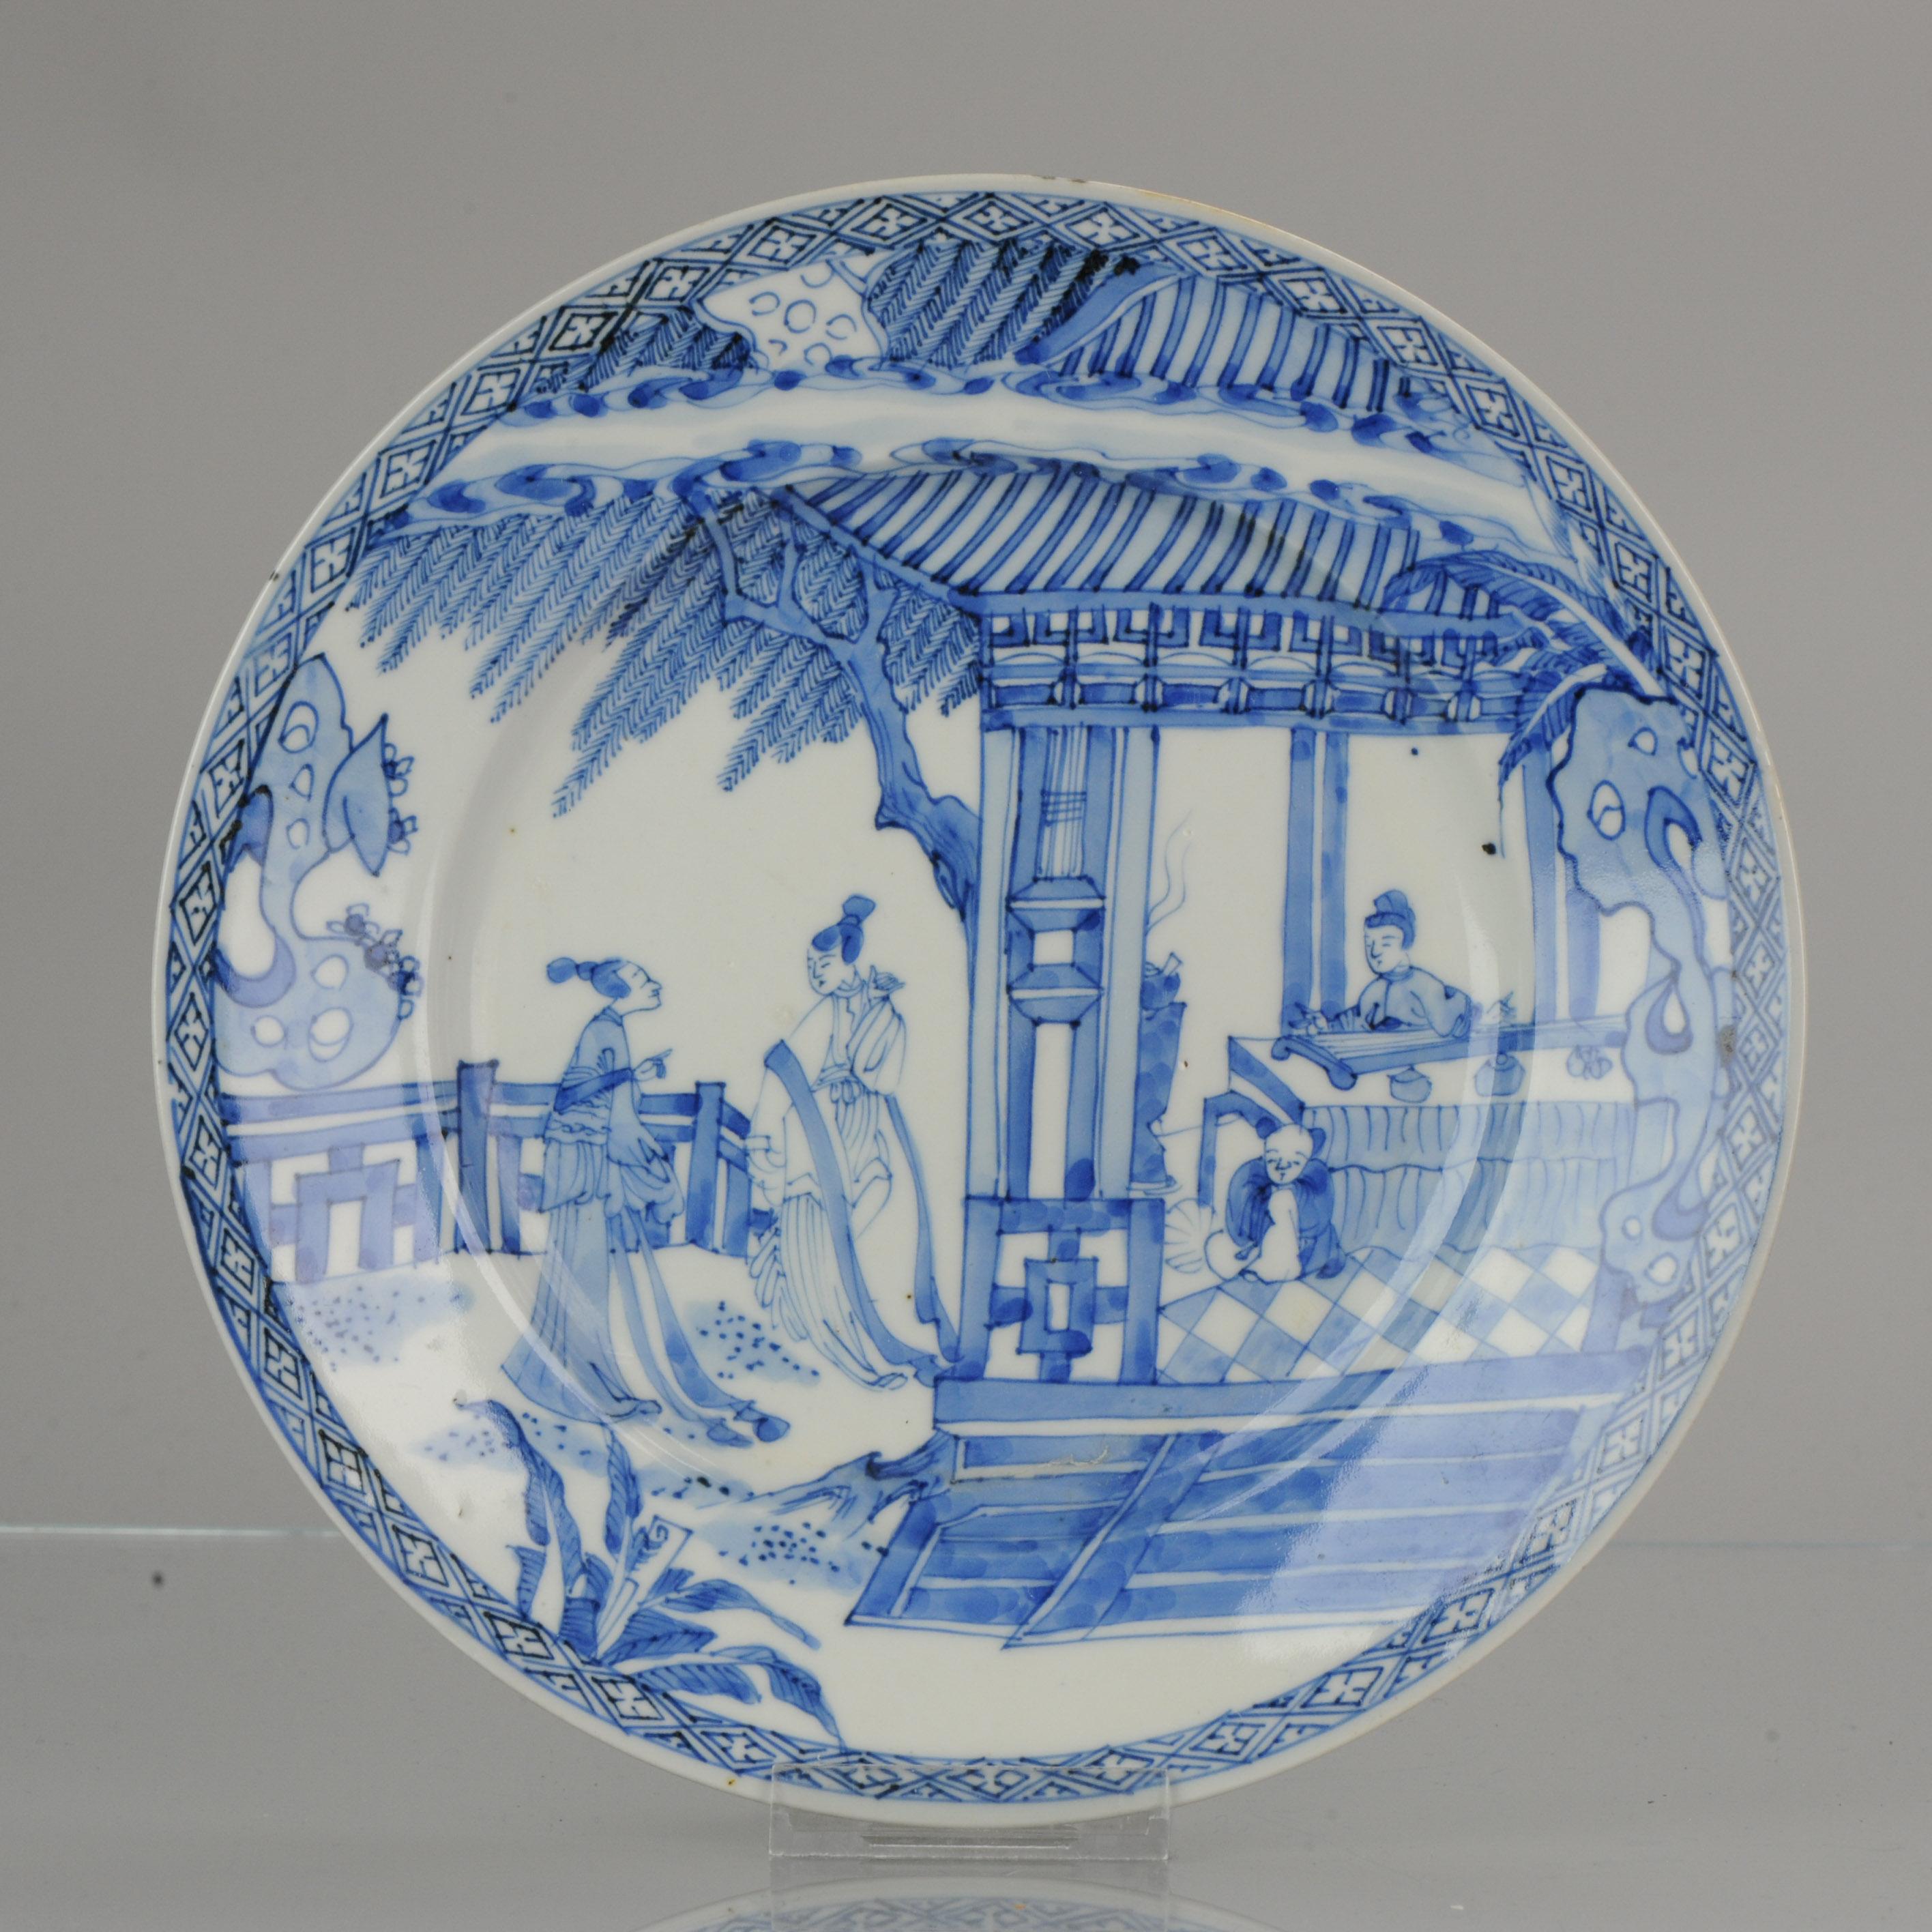 A very nicely decorated Japanese Porcelain dish in Chinese style. Marked at base.

There is an underglaze blue bird mark at the base.

The central scene is of a busy pagoda garden, two elegant ladies are next to a large house. Inside the pagode